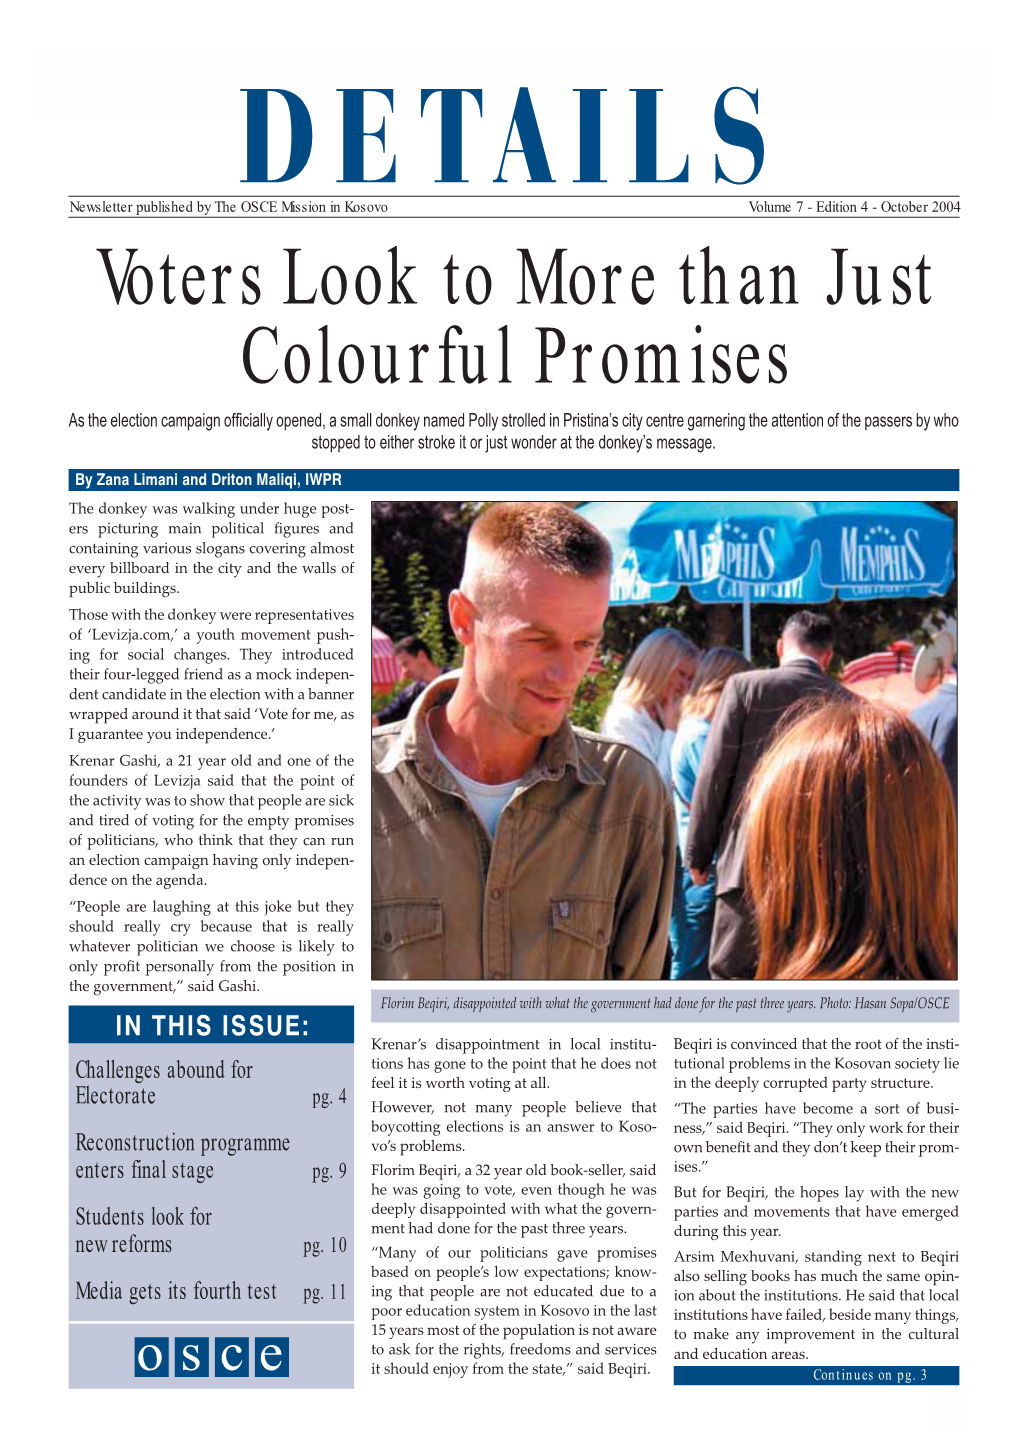 Voters Look to More Than Just Colourful Promises